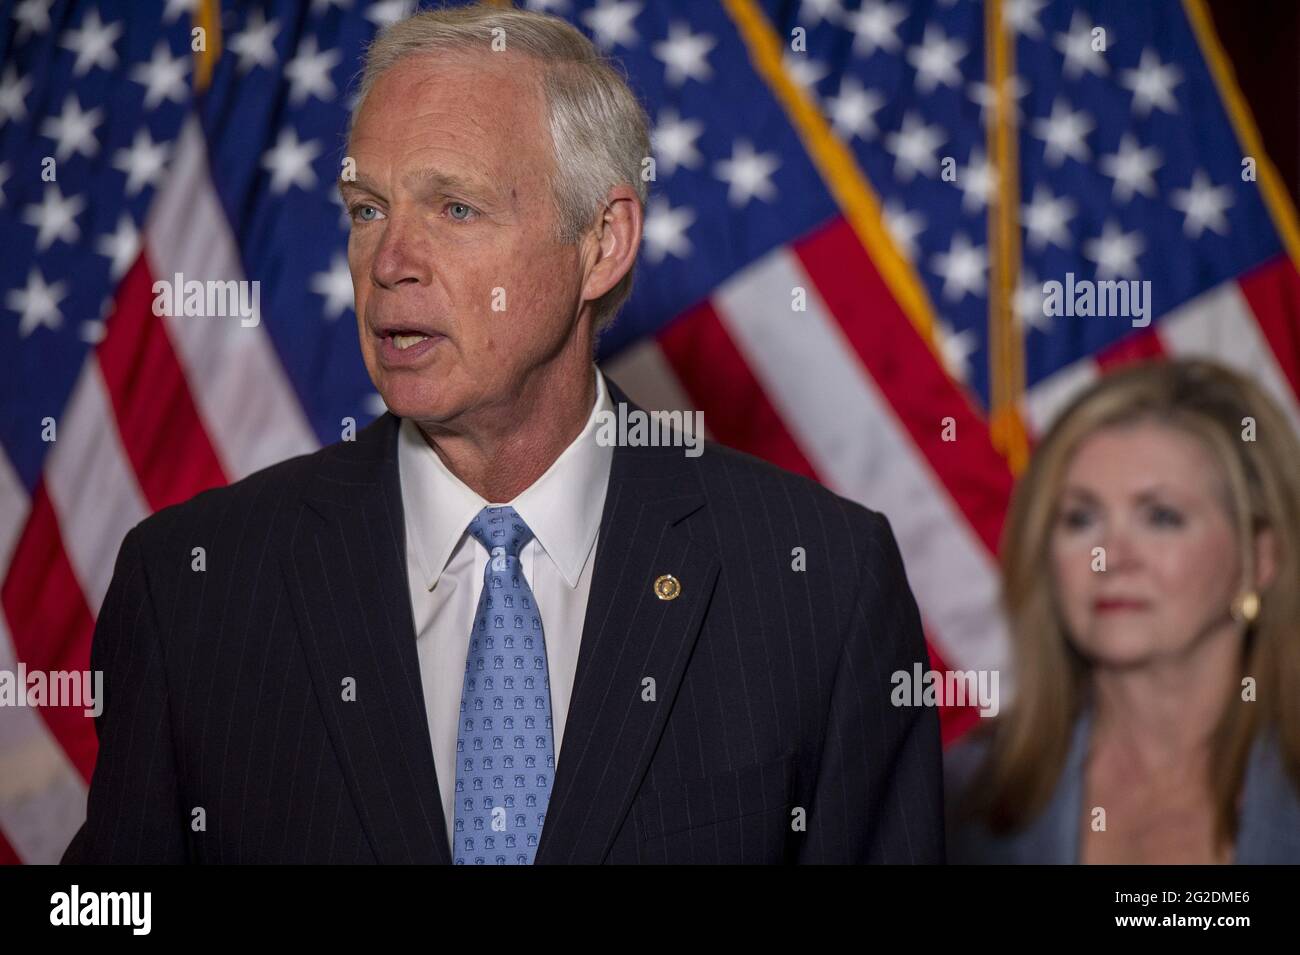 Washington, United States. 10th June, 2021. Senator Ron Johnson, R-WI, speaks during a news conference in the US Capitol in Washington, DC., on Wednesday, June 10, 2021. The conference, held by Senate republicans, discussed Big Tech and coronavirus censorship. Photo by Bonnie Cash/UPI. Credit: UPI/Alamy Live News Stock Photo